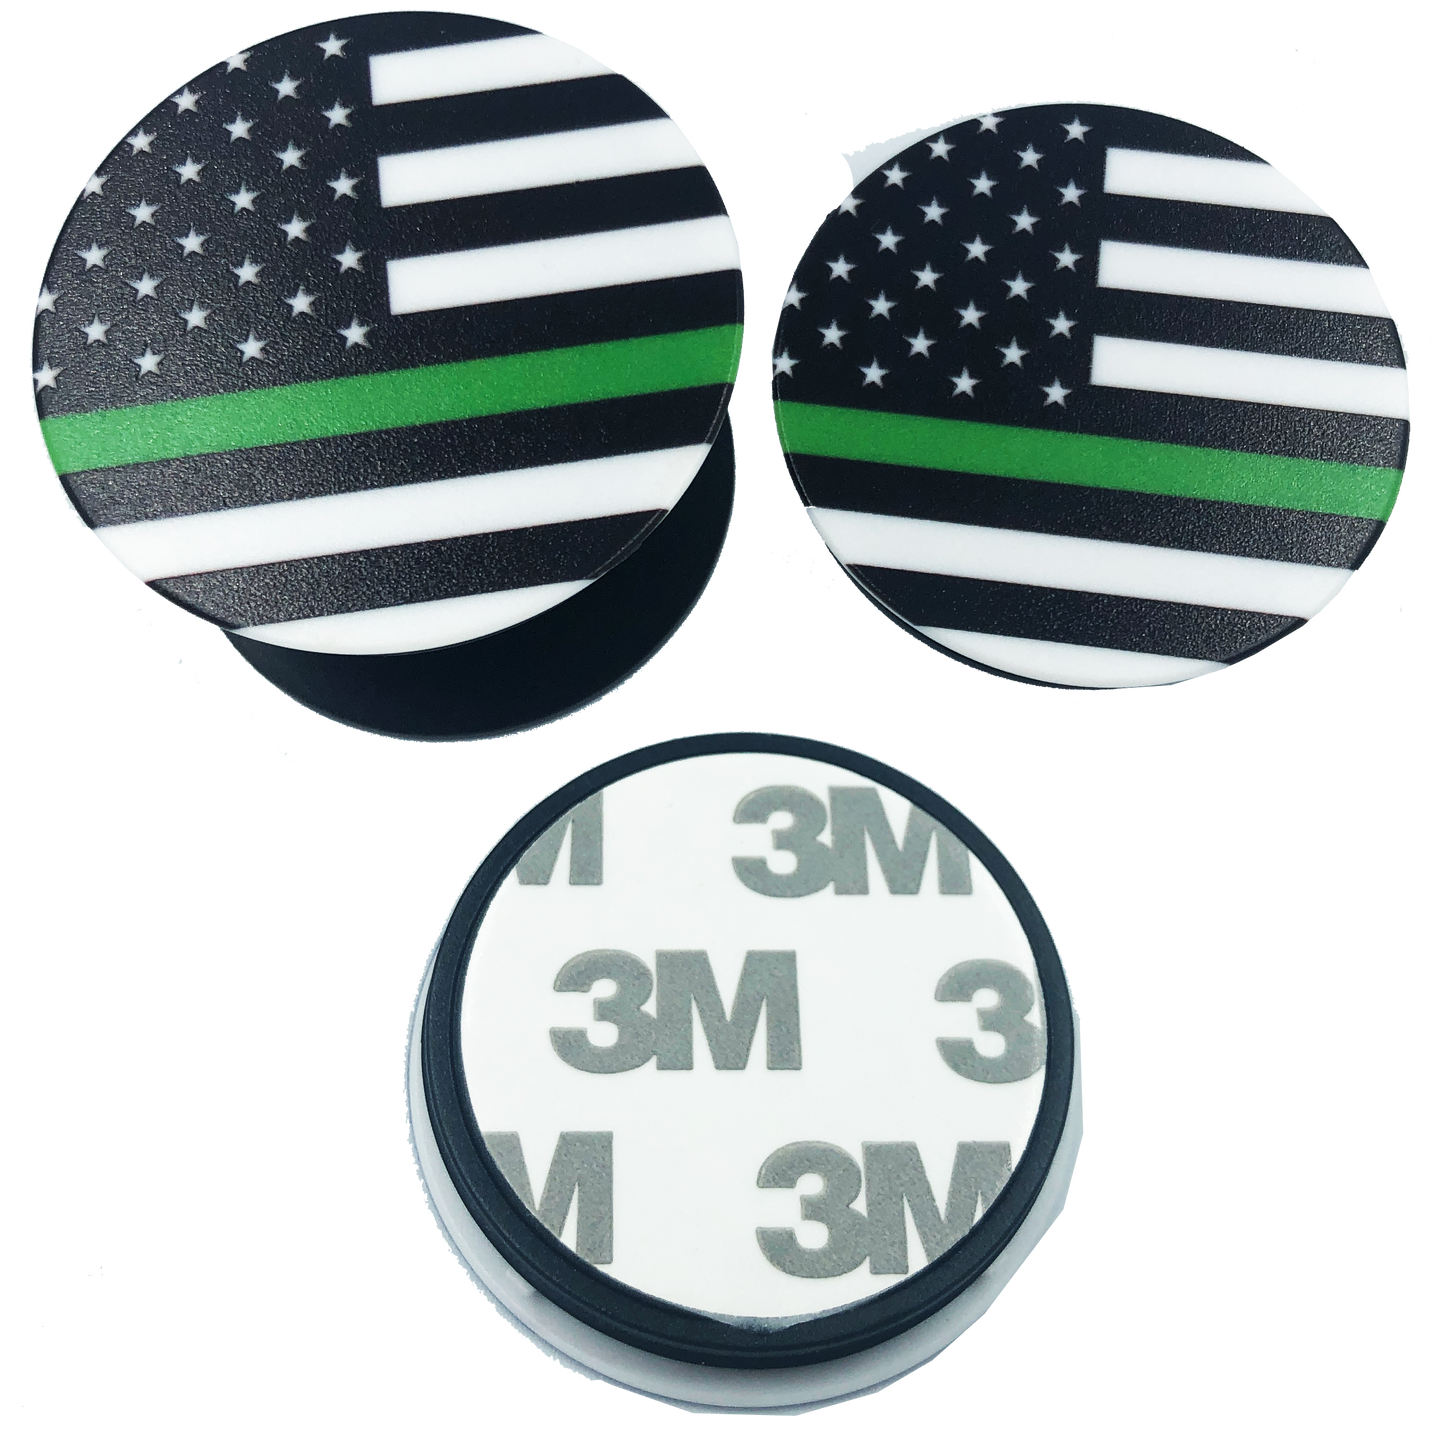 Thin Green Line pop open cell phone holder iphone android ipad smart phone Army Security Sheriff Border Patrol